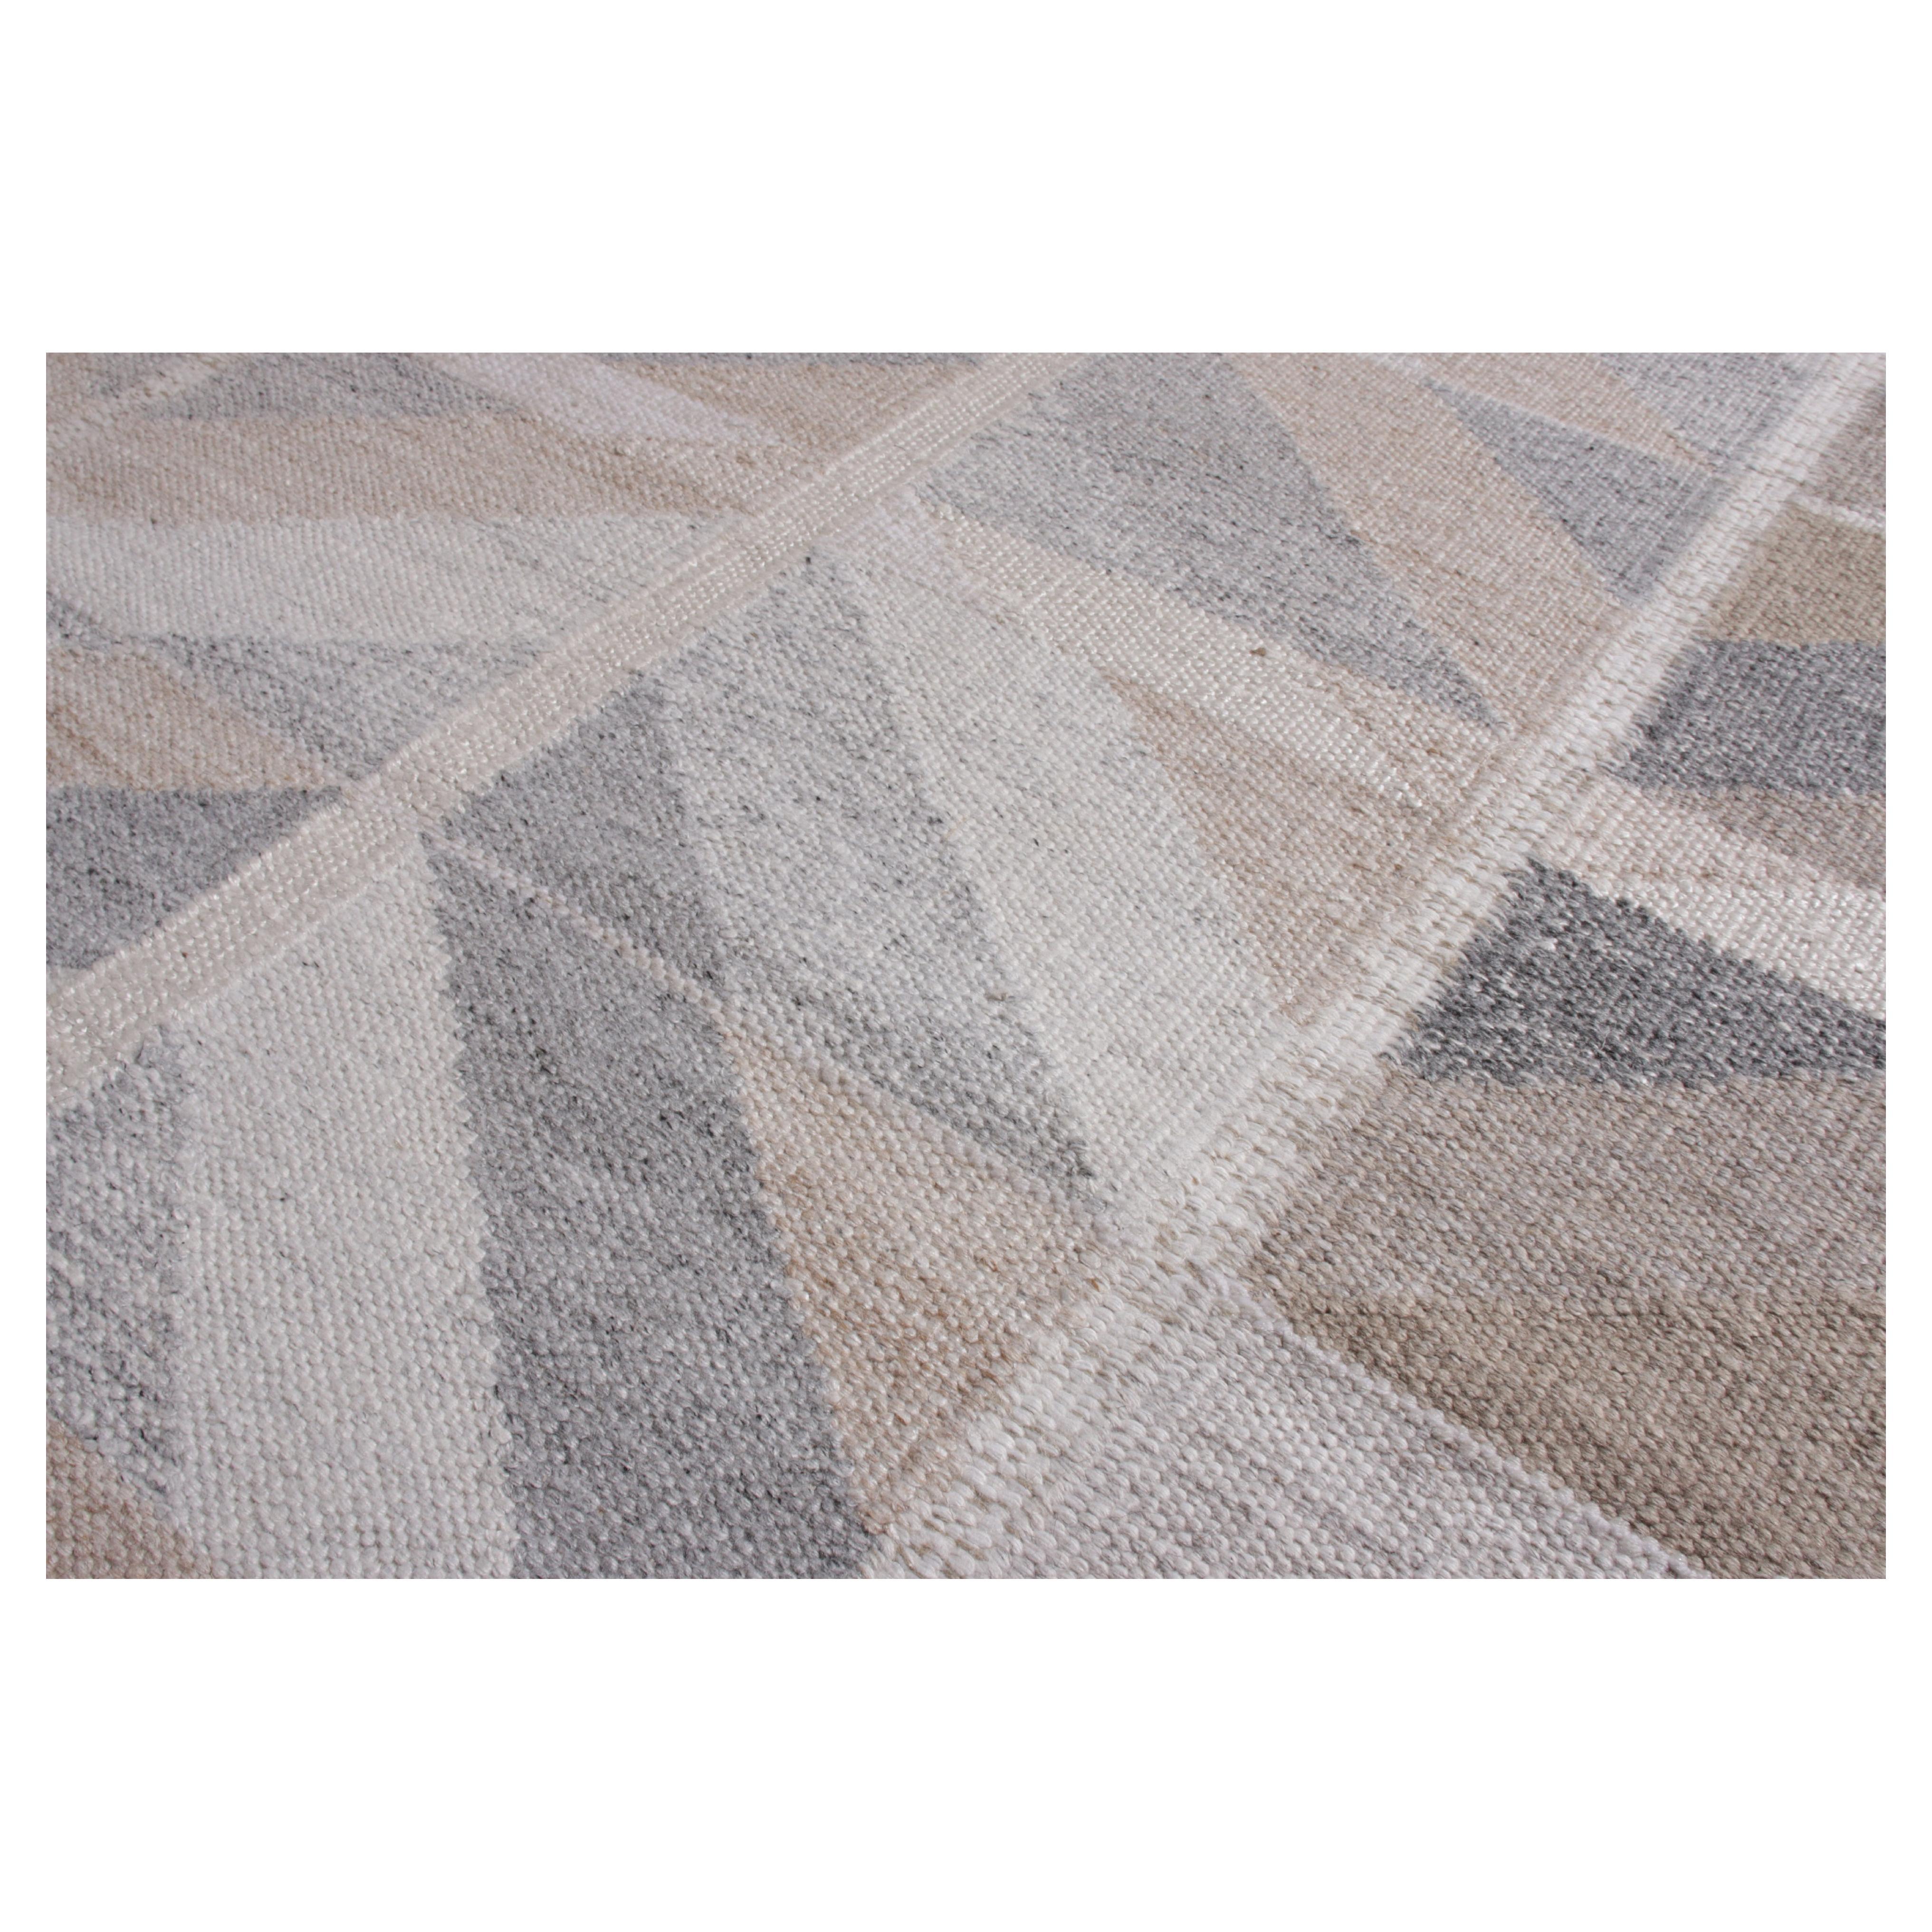 Indian Rug & Kilim’s Scandinavian Style Kilim in Gray and Beige-Brown Chevron Pattern For Sale